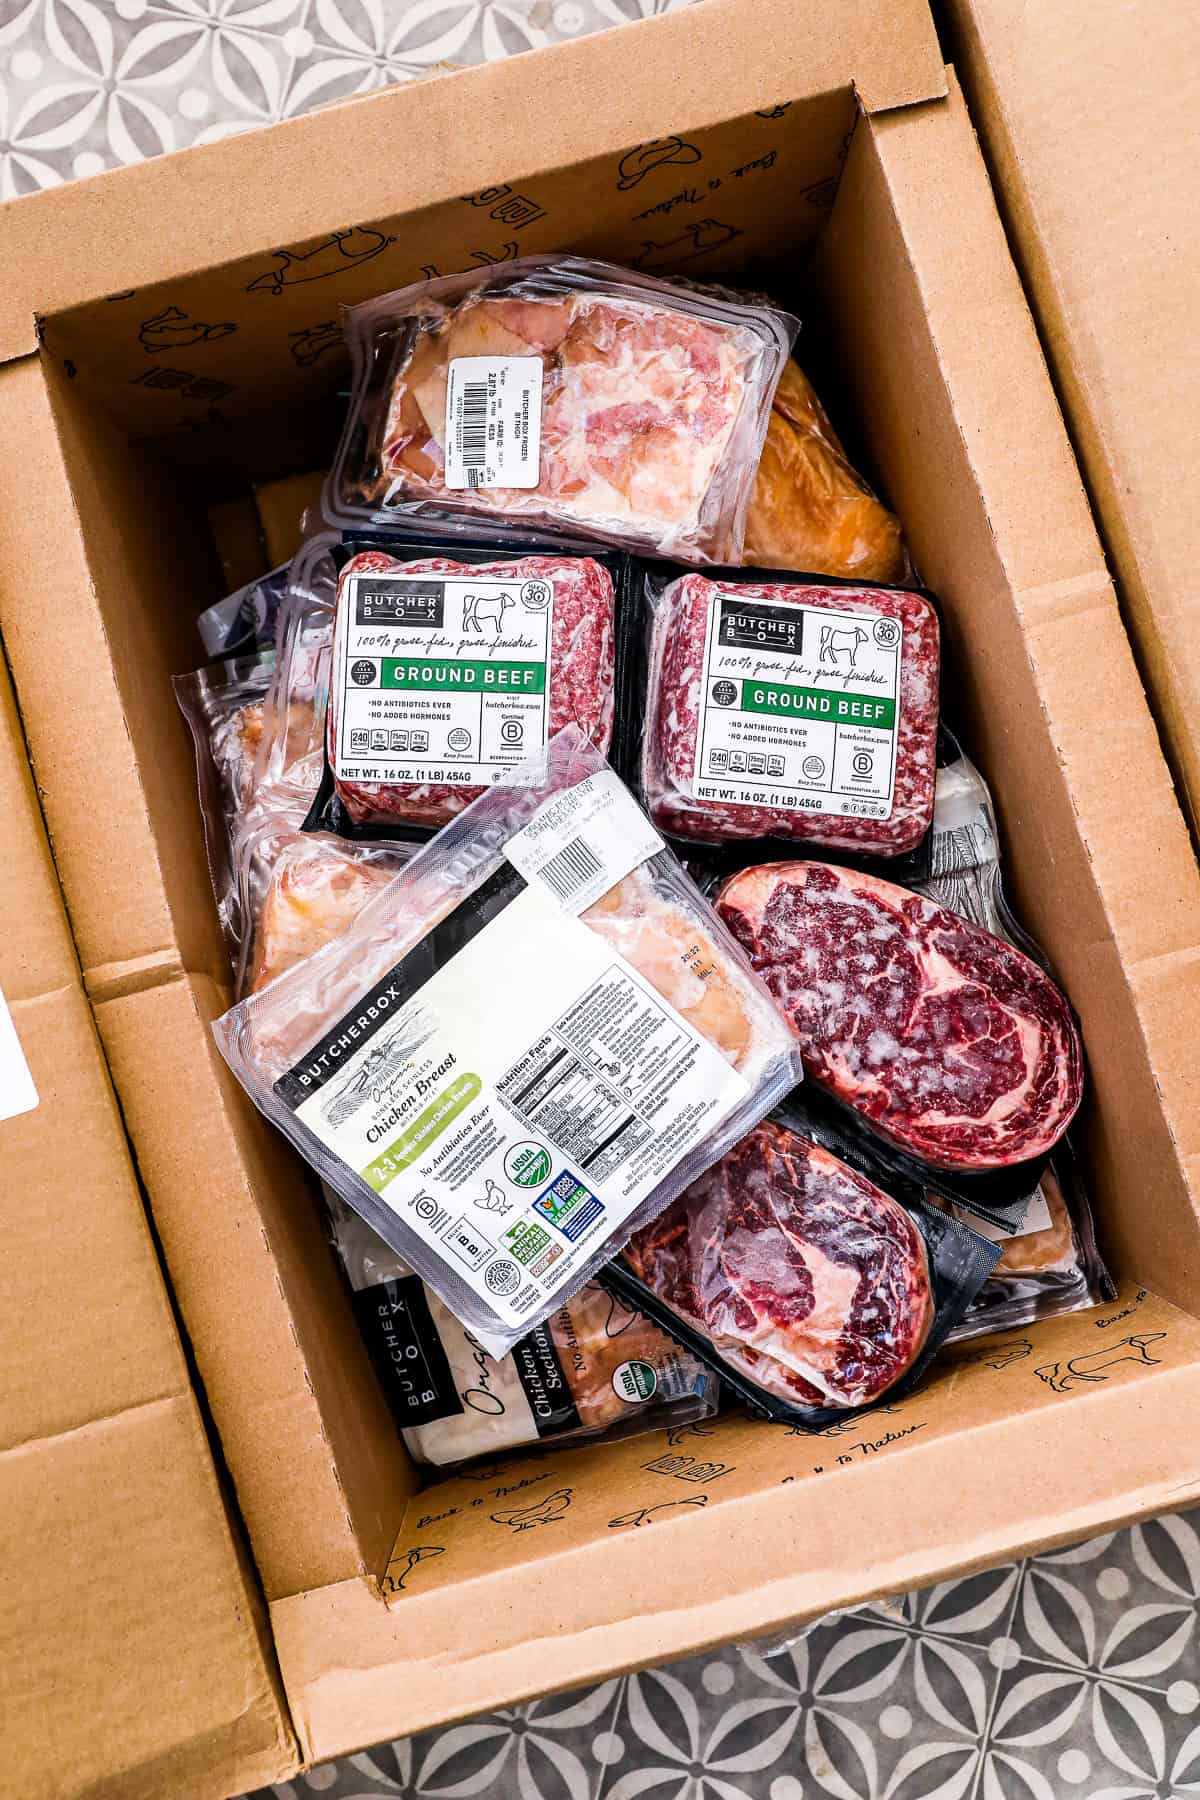 Is ButcherBox Cheaper Than Whole Foods? 